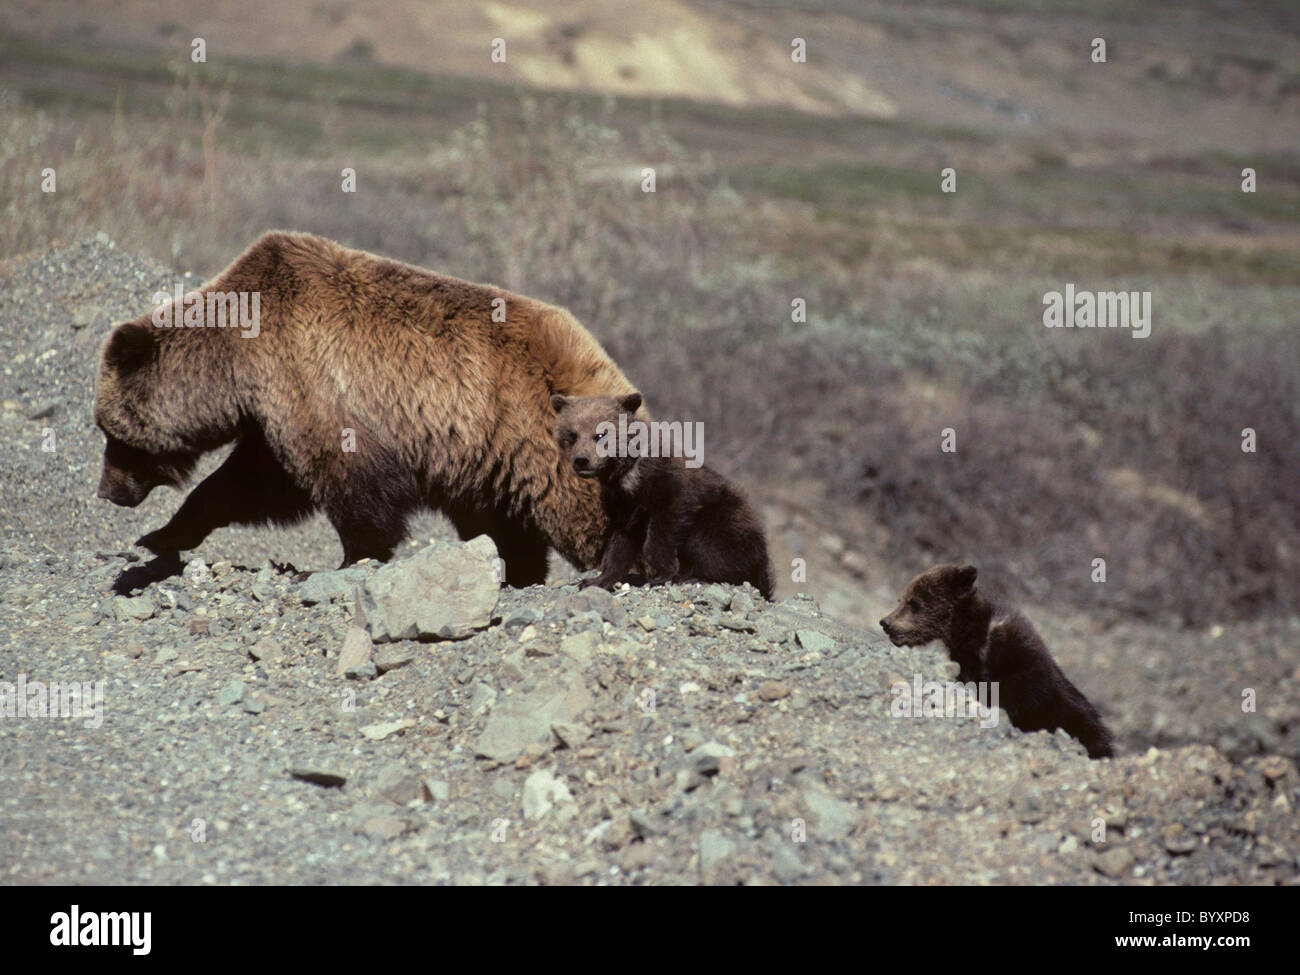 Sow and Cubs, Grizzly Bear, Denali National Park, Alaska, brown bear, grizzly bear, grizzly bears, brown bears Stock Photo